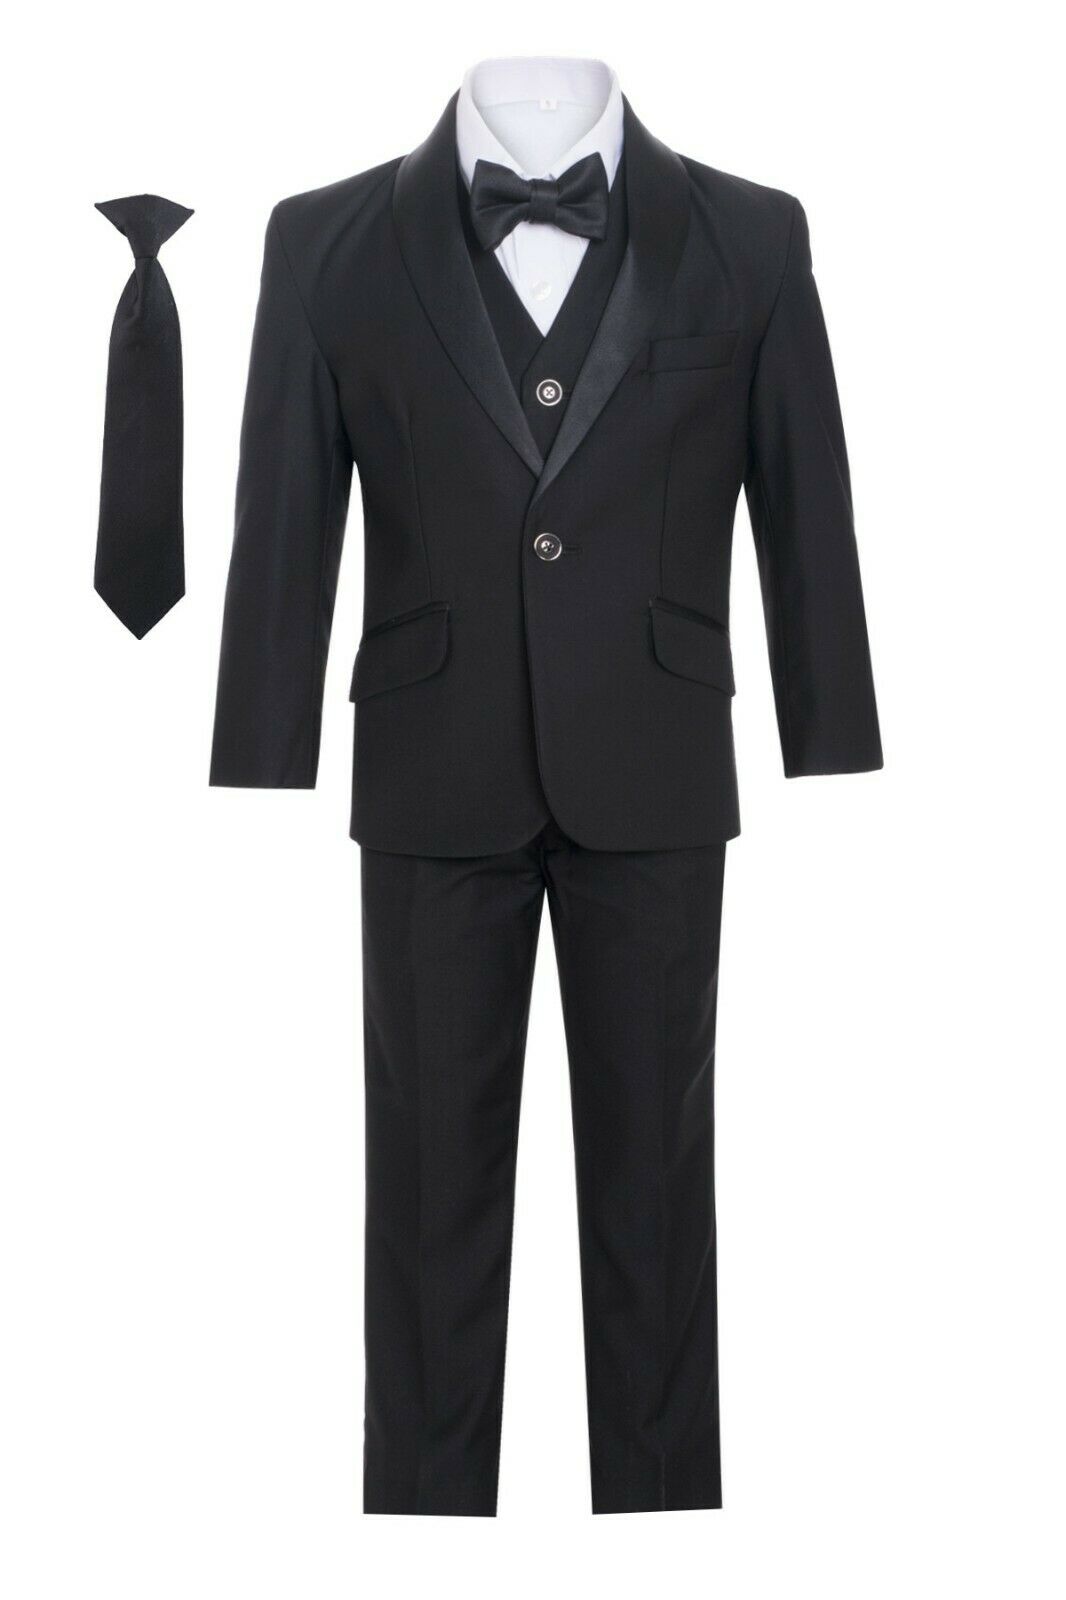 The Shawl Tuxedo Suit, a vibrant expression of style and charm for a boy, with colors to match his personality.